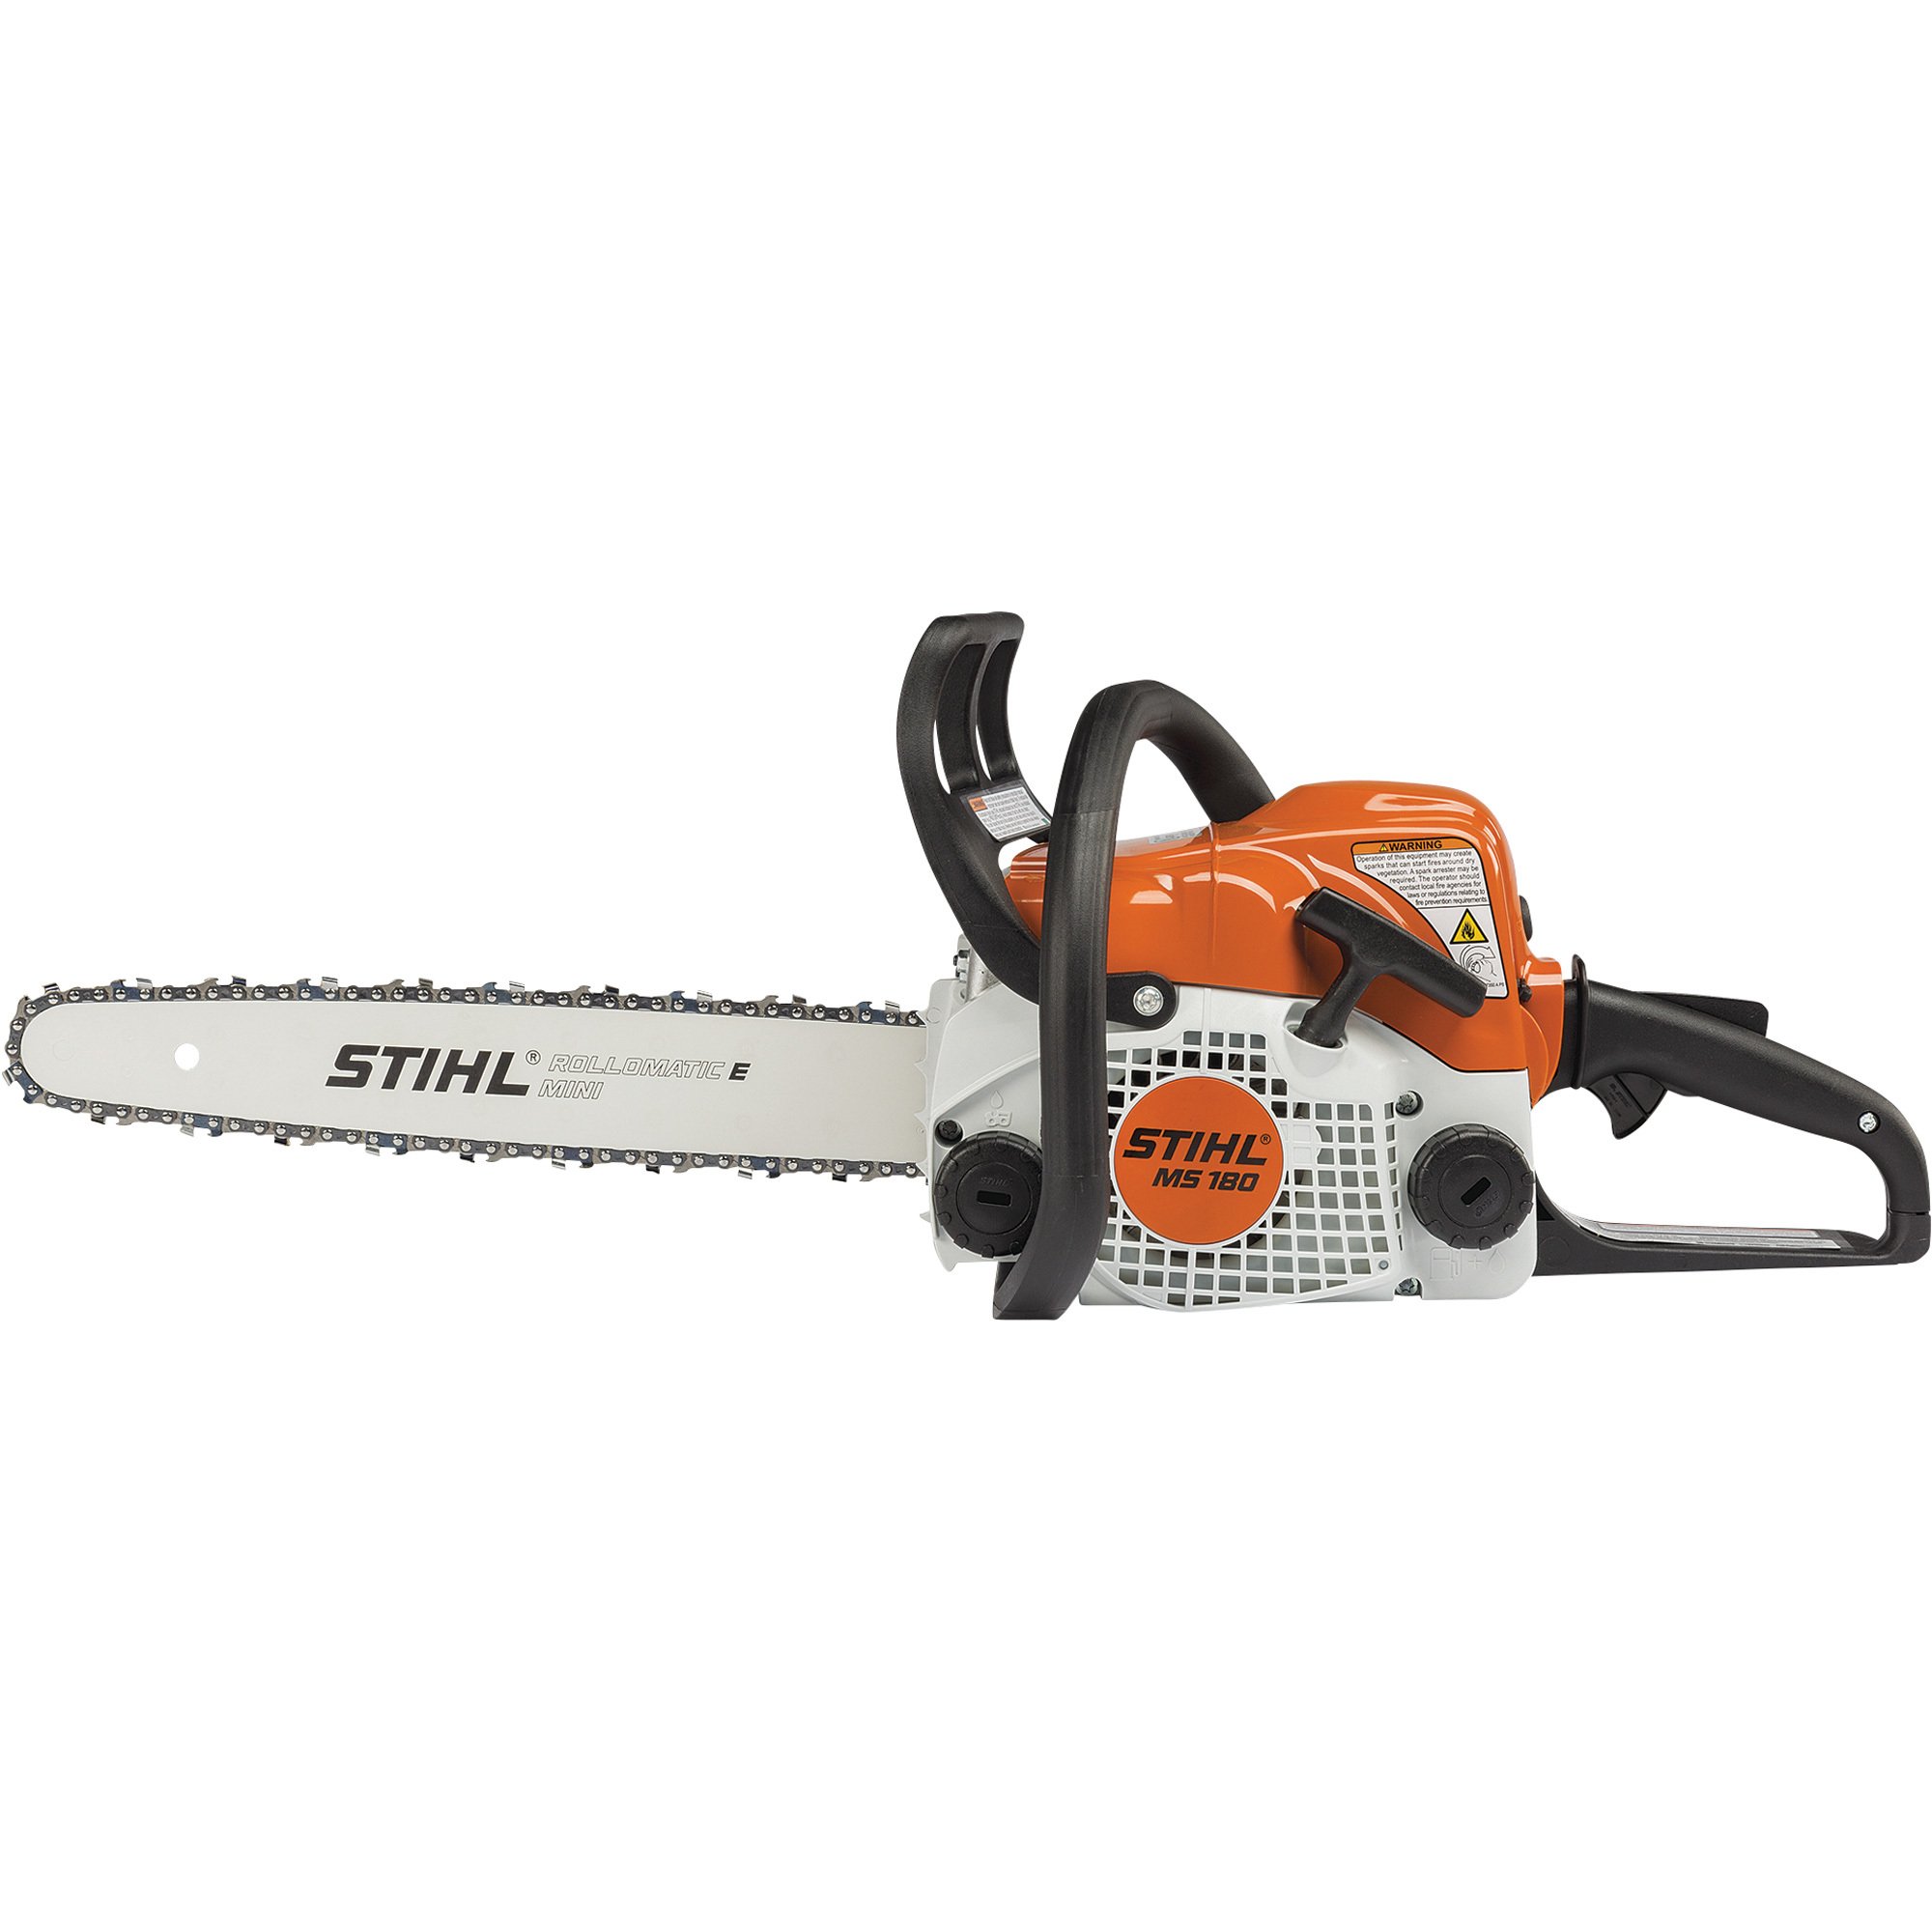 Stihl Gas-Powered Chainsaw, 16in. Bar, 31.9cc Engine, 3/8PM3 Chain Pitch,  Model# MS 180